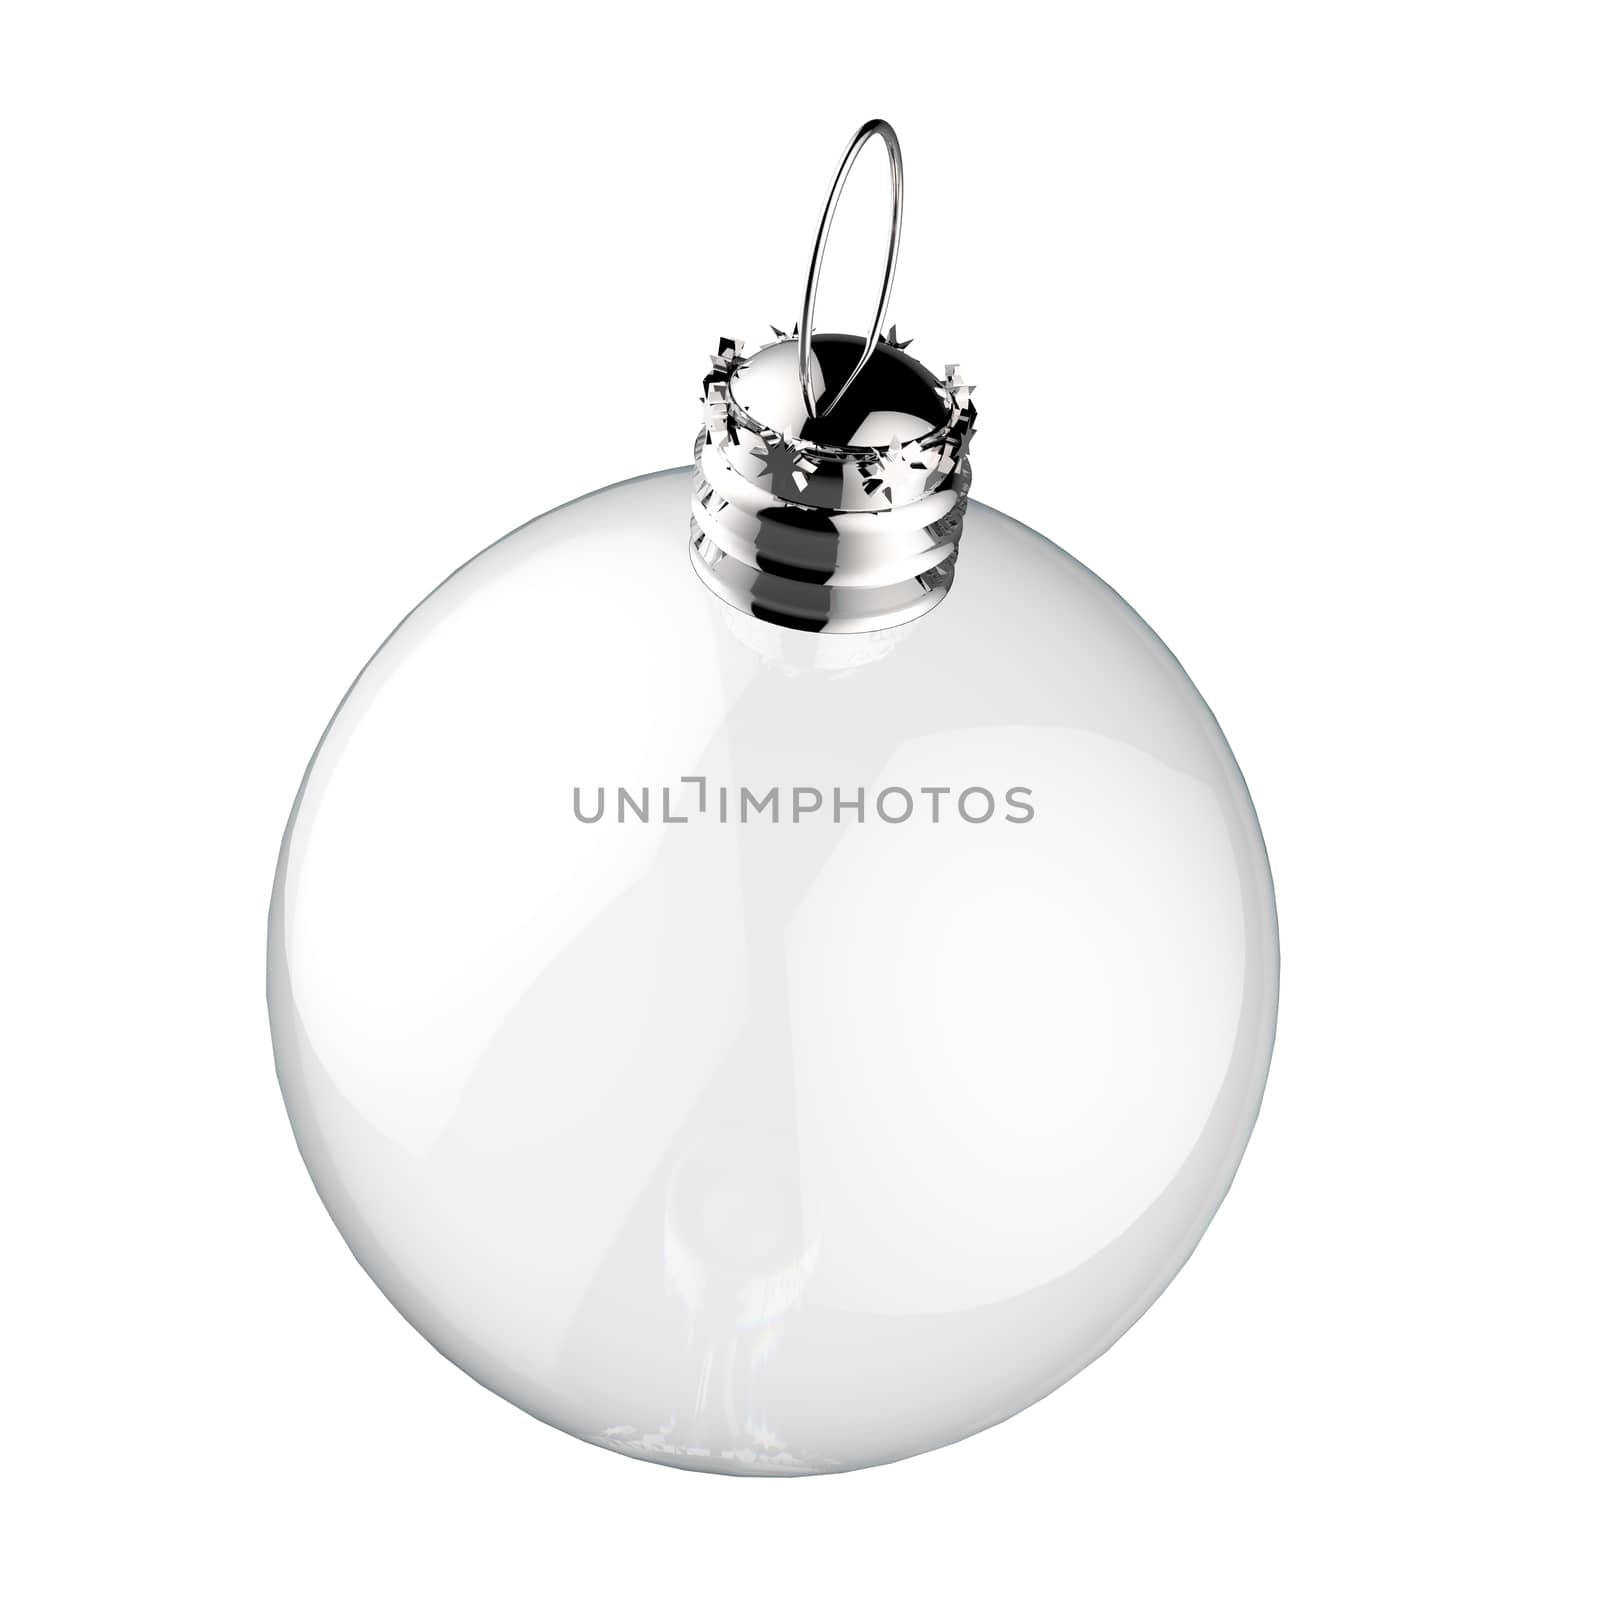 Empty Christmas ornament by everythingpossible